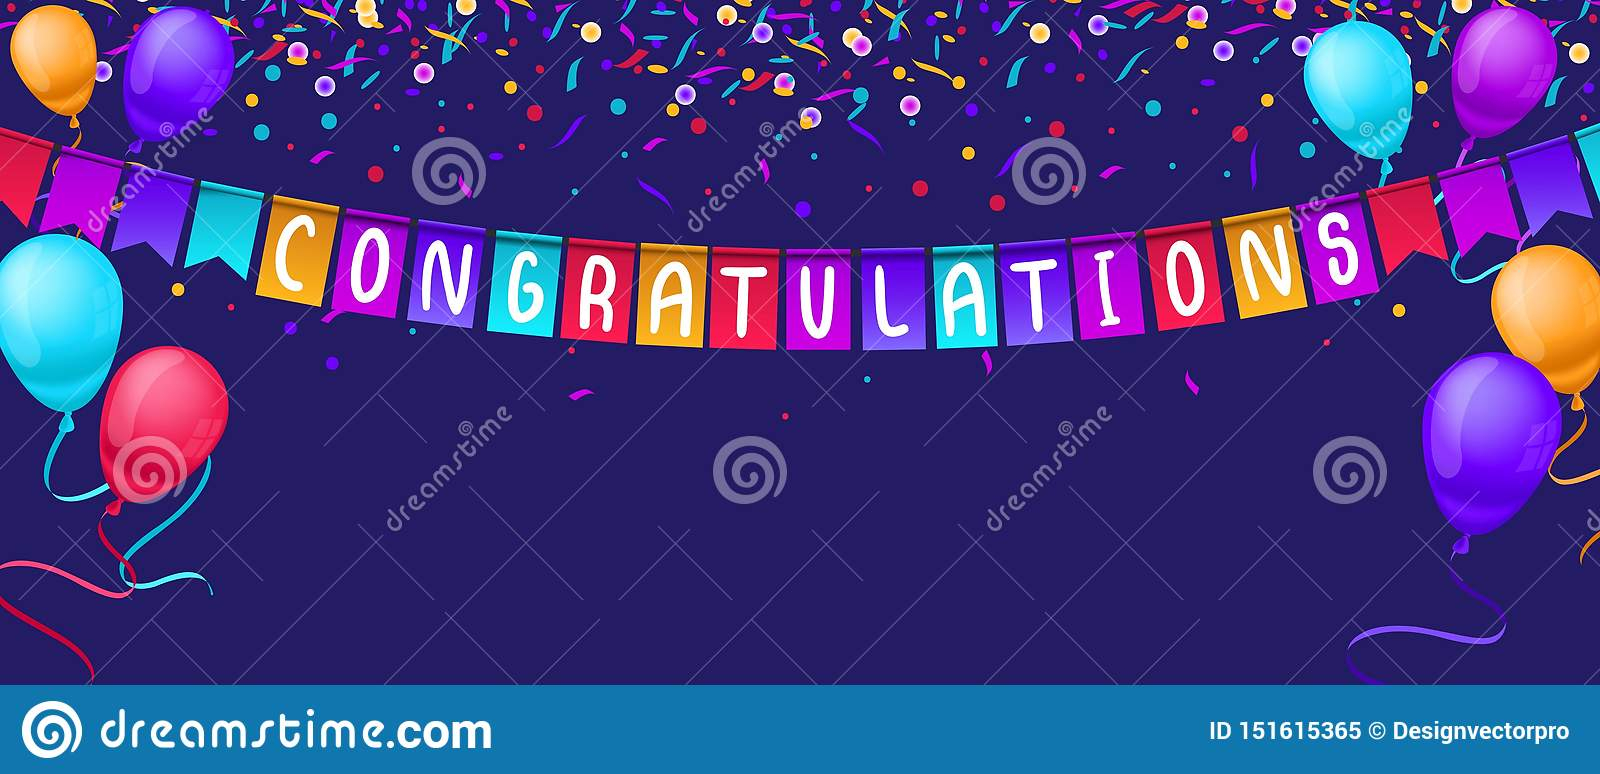 Congratulations Banner Template with Balloons and Confetti  Within Congratulations Banner Template